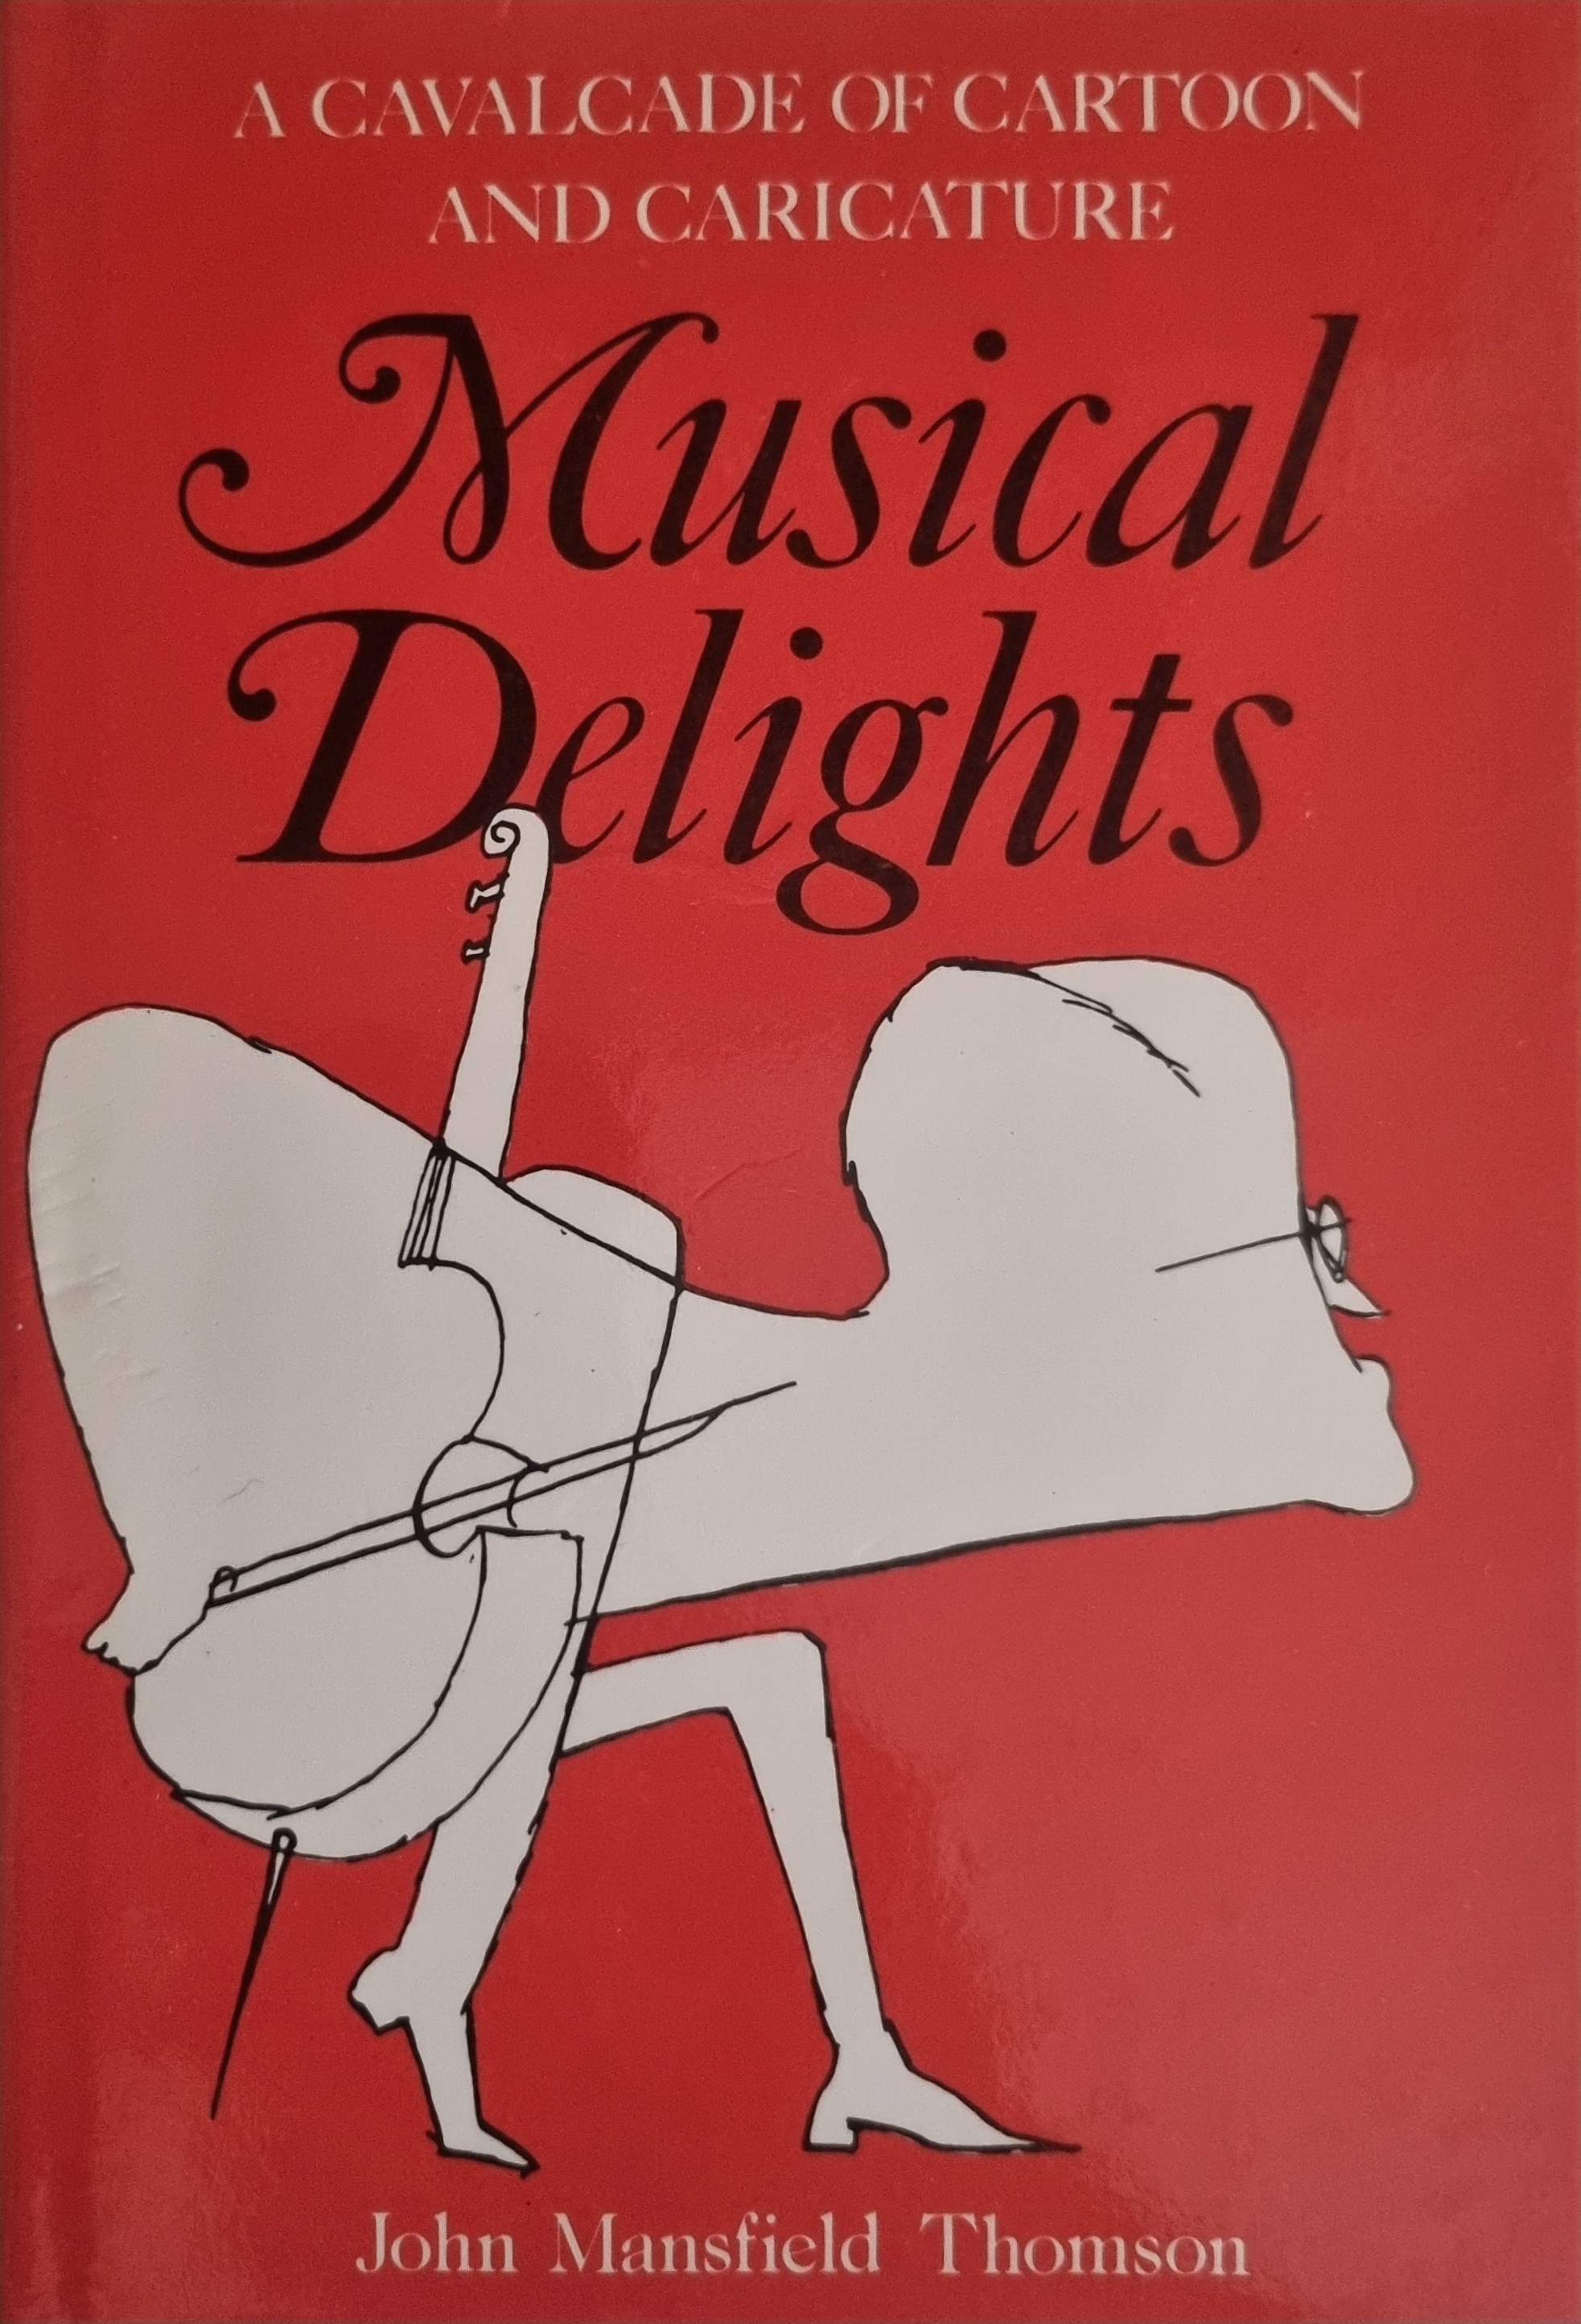 Musical delights: A cavalcade of cartoon and caricature 